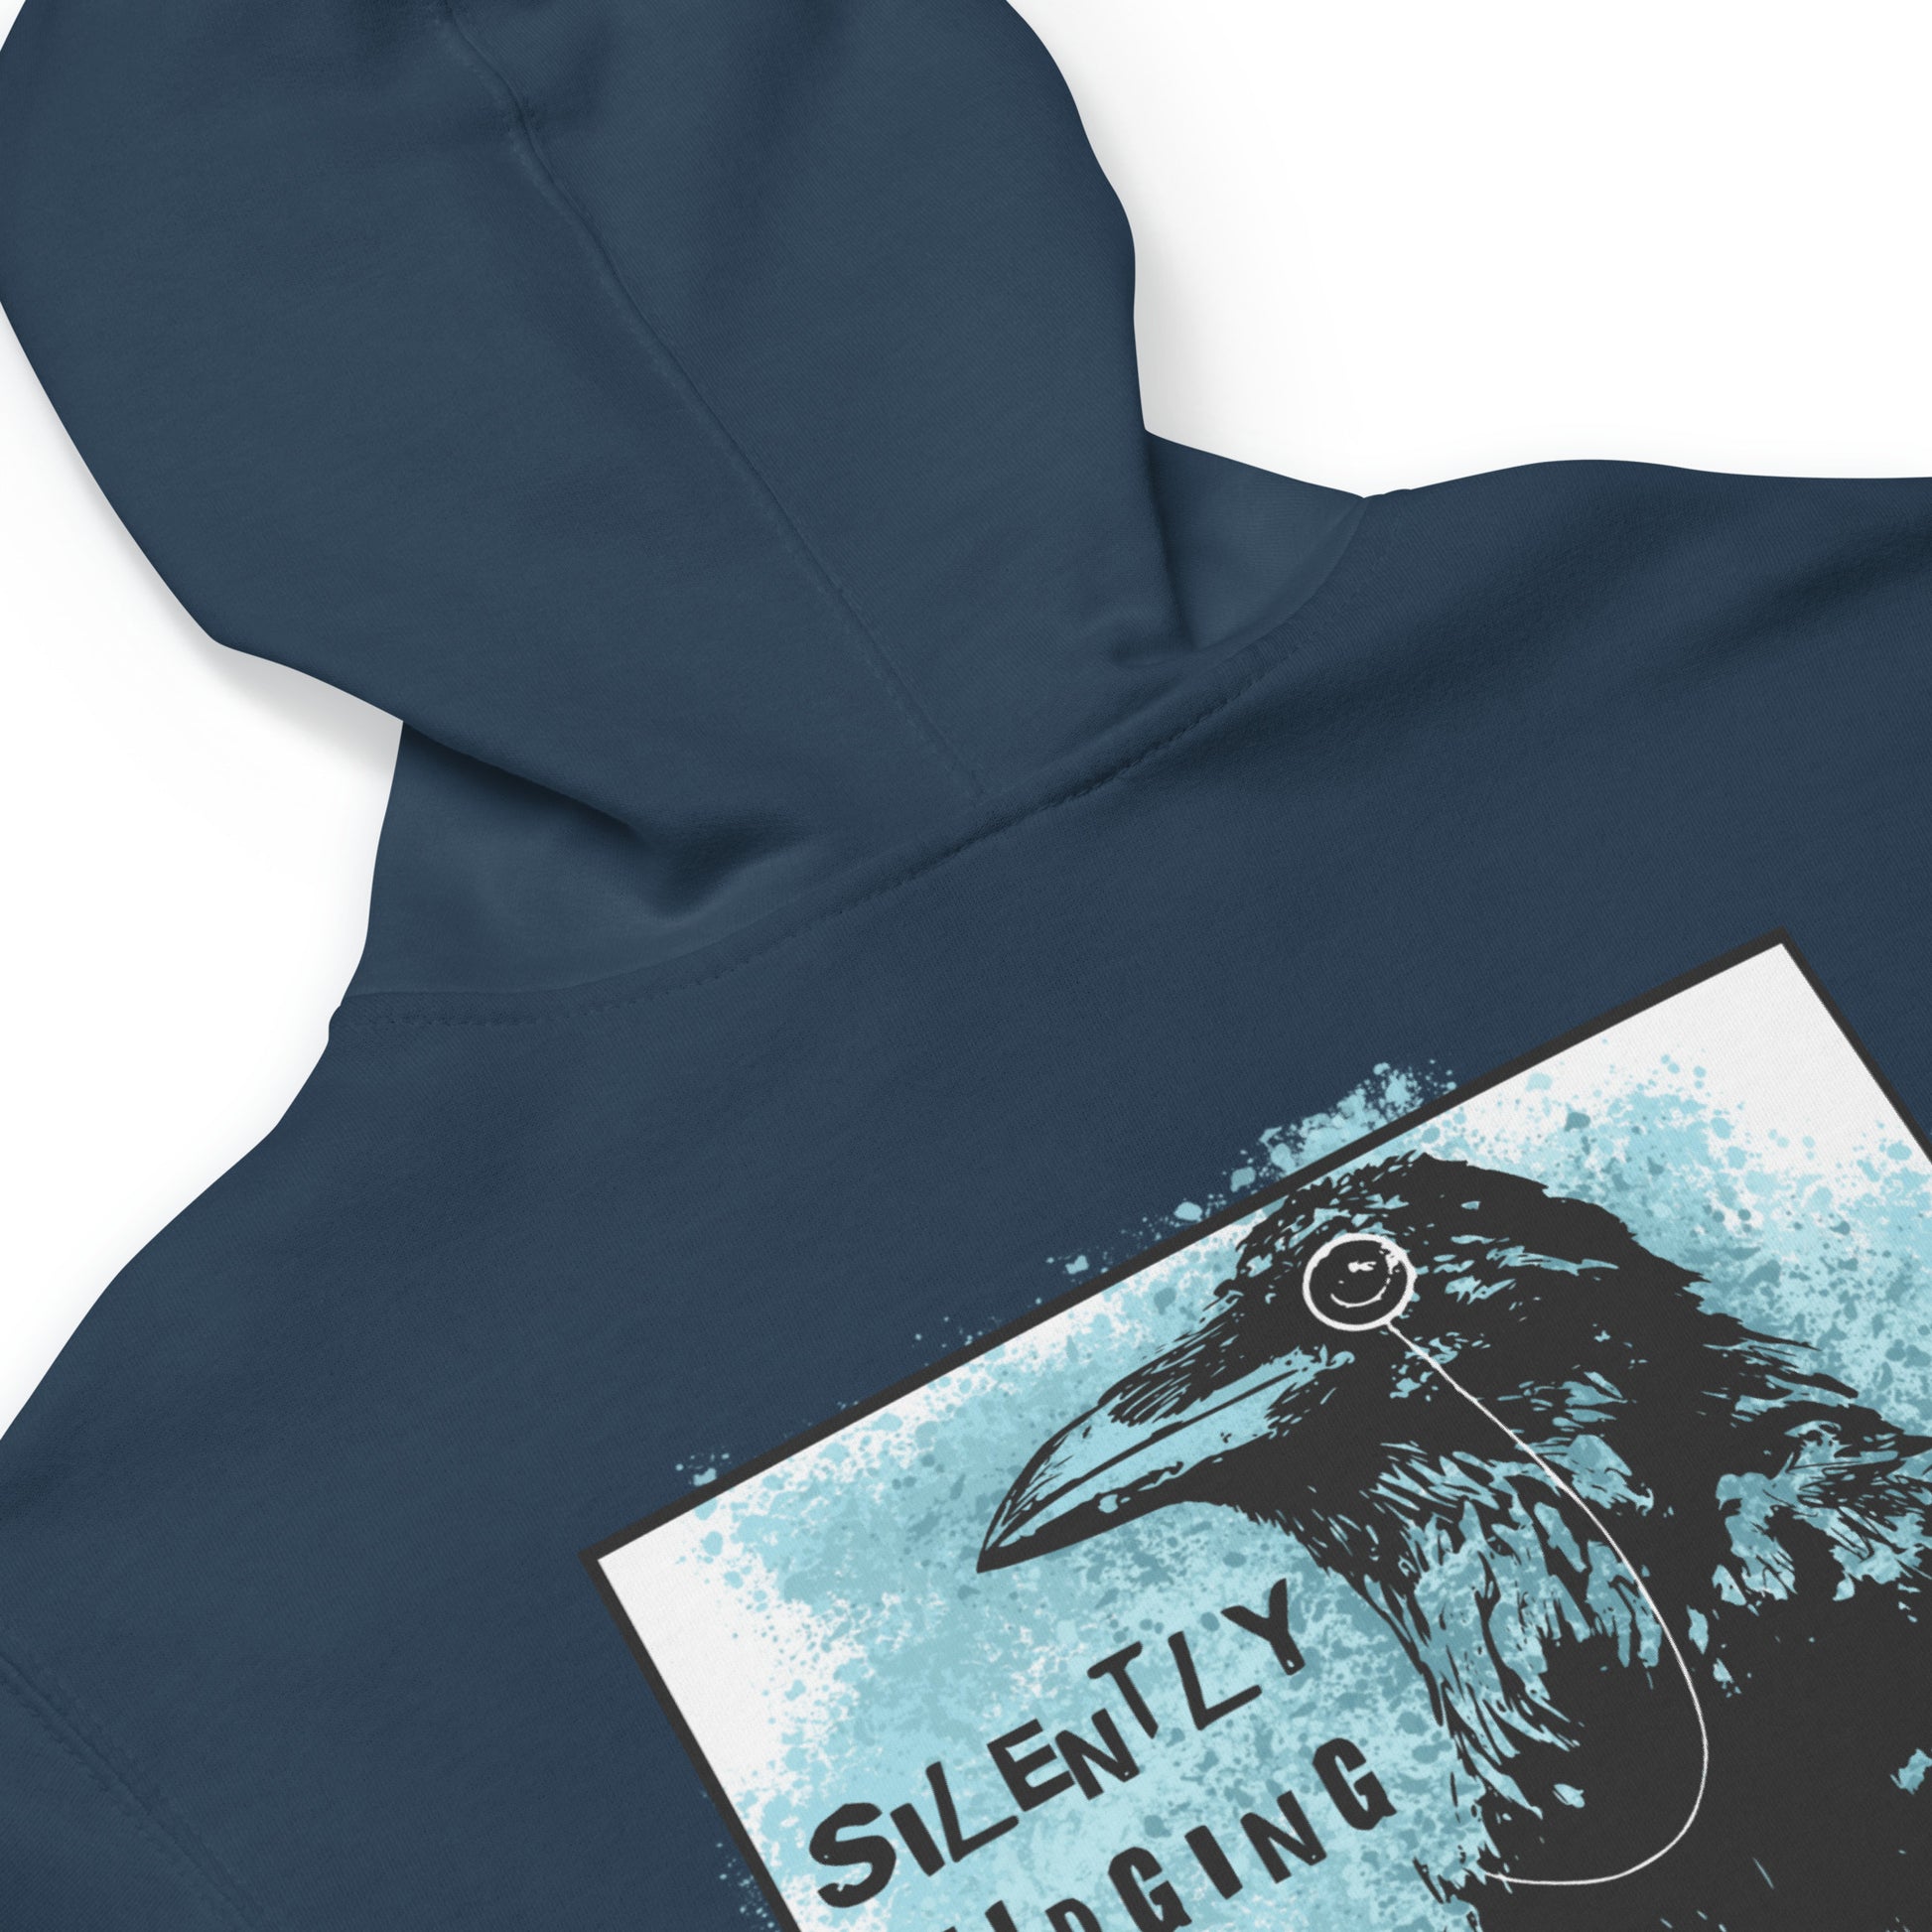 Unisex fleece-lined navy blue colored zip-up hoodie with silently judging text by black crow wearing a monocle in a square with blue paint splatters.  Design on the back of hoodie. Image shows detail of hood seam.